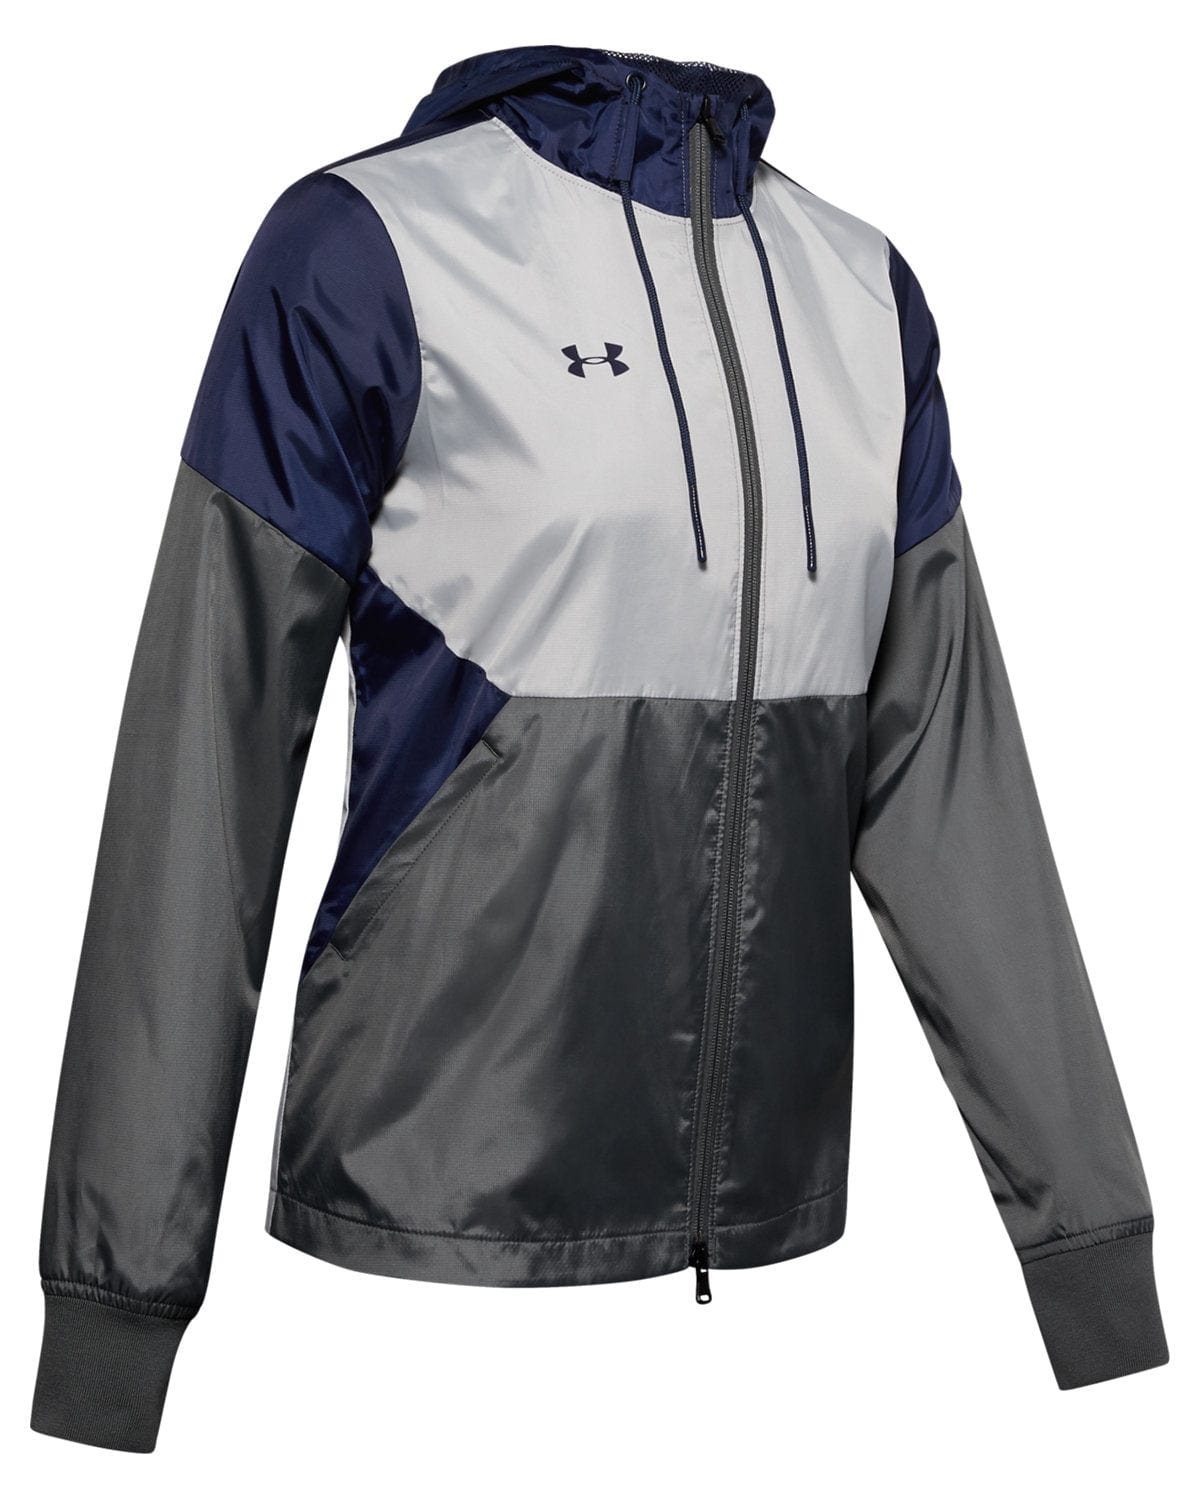 Under Armour Outerwear XS / Navy/Navy Under Armour - Women's Team Legacy Jacket